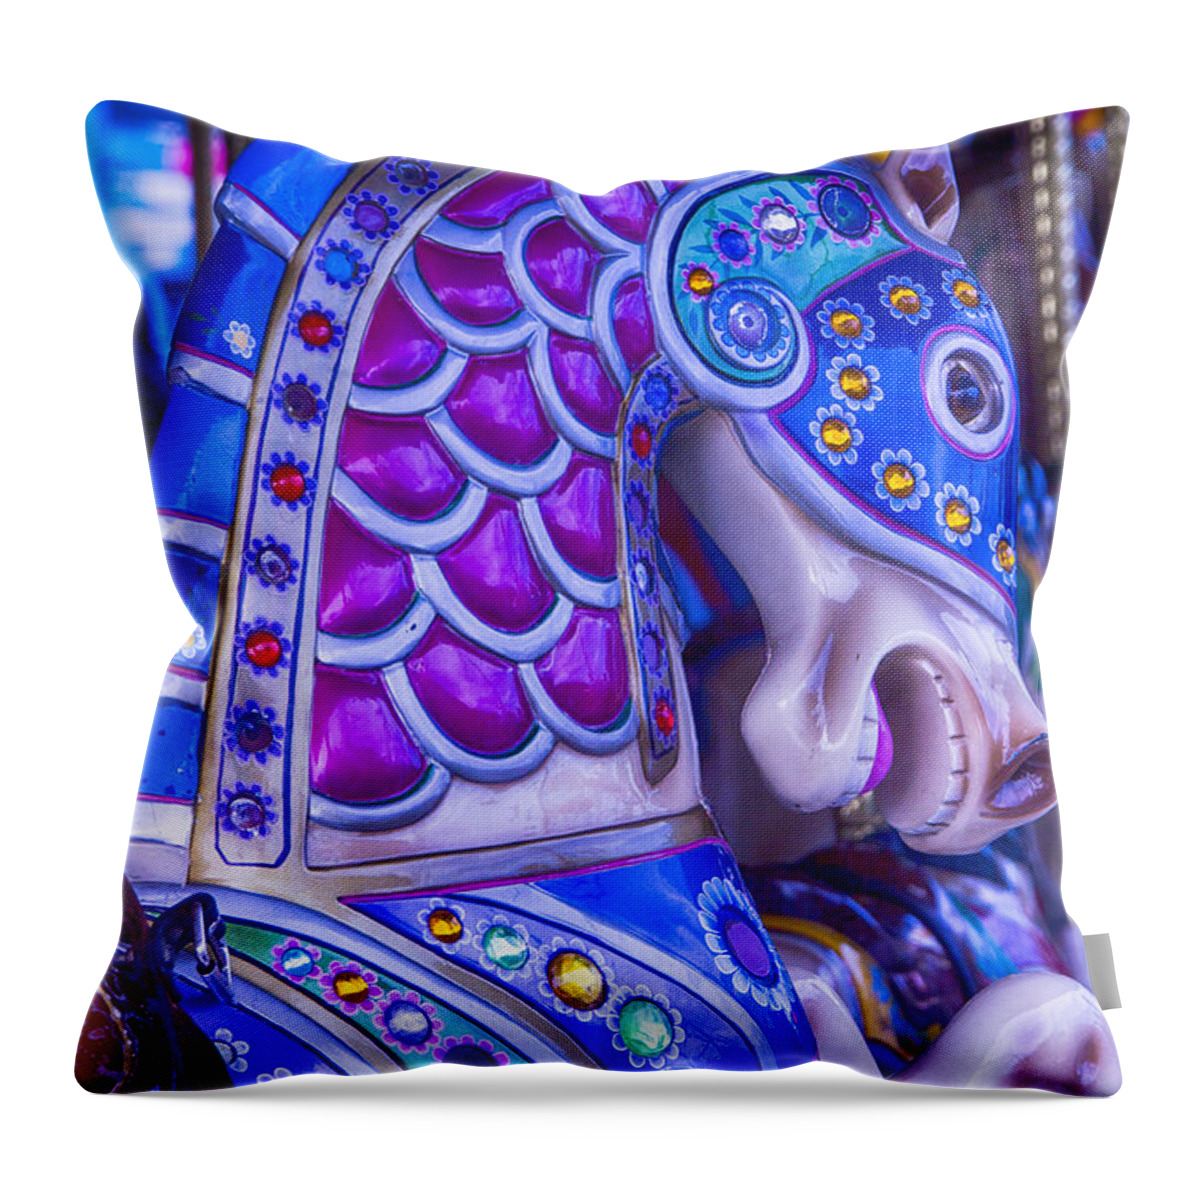 Wild Carrousel Horses Throw Pillow featuring the photograph Fancy Grand Carrousel Ride by Garry Gay